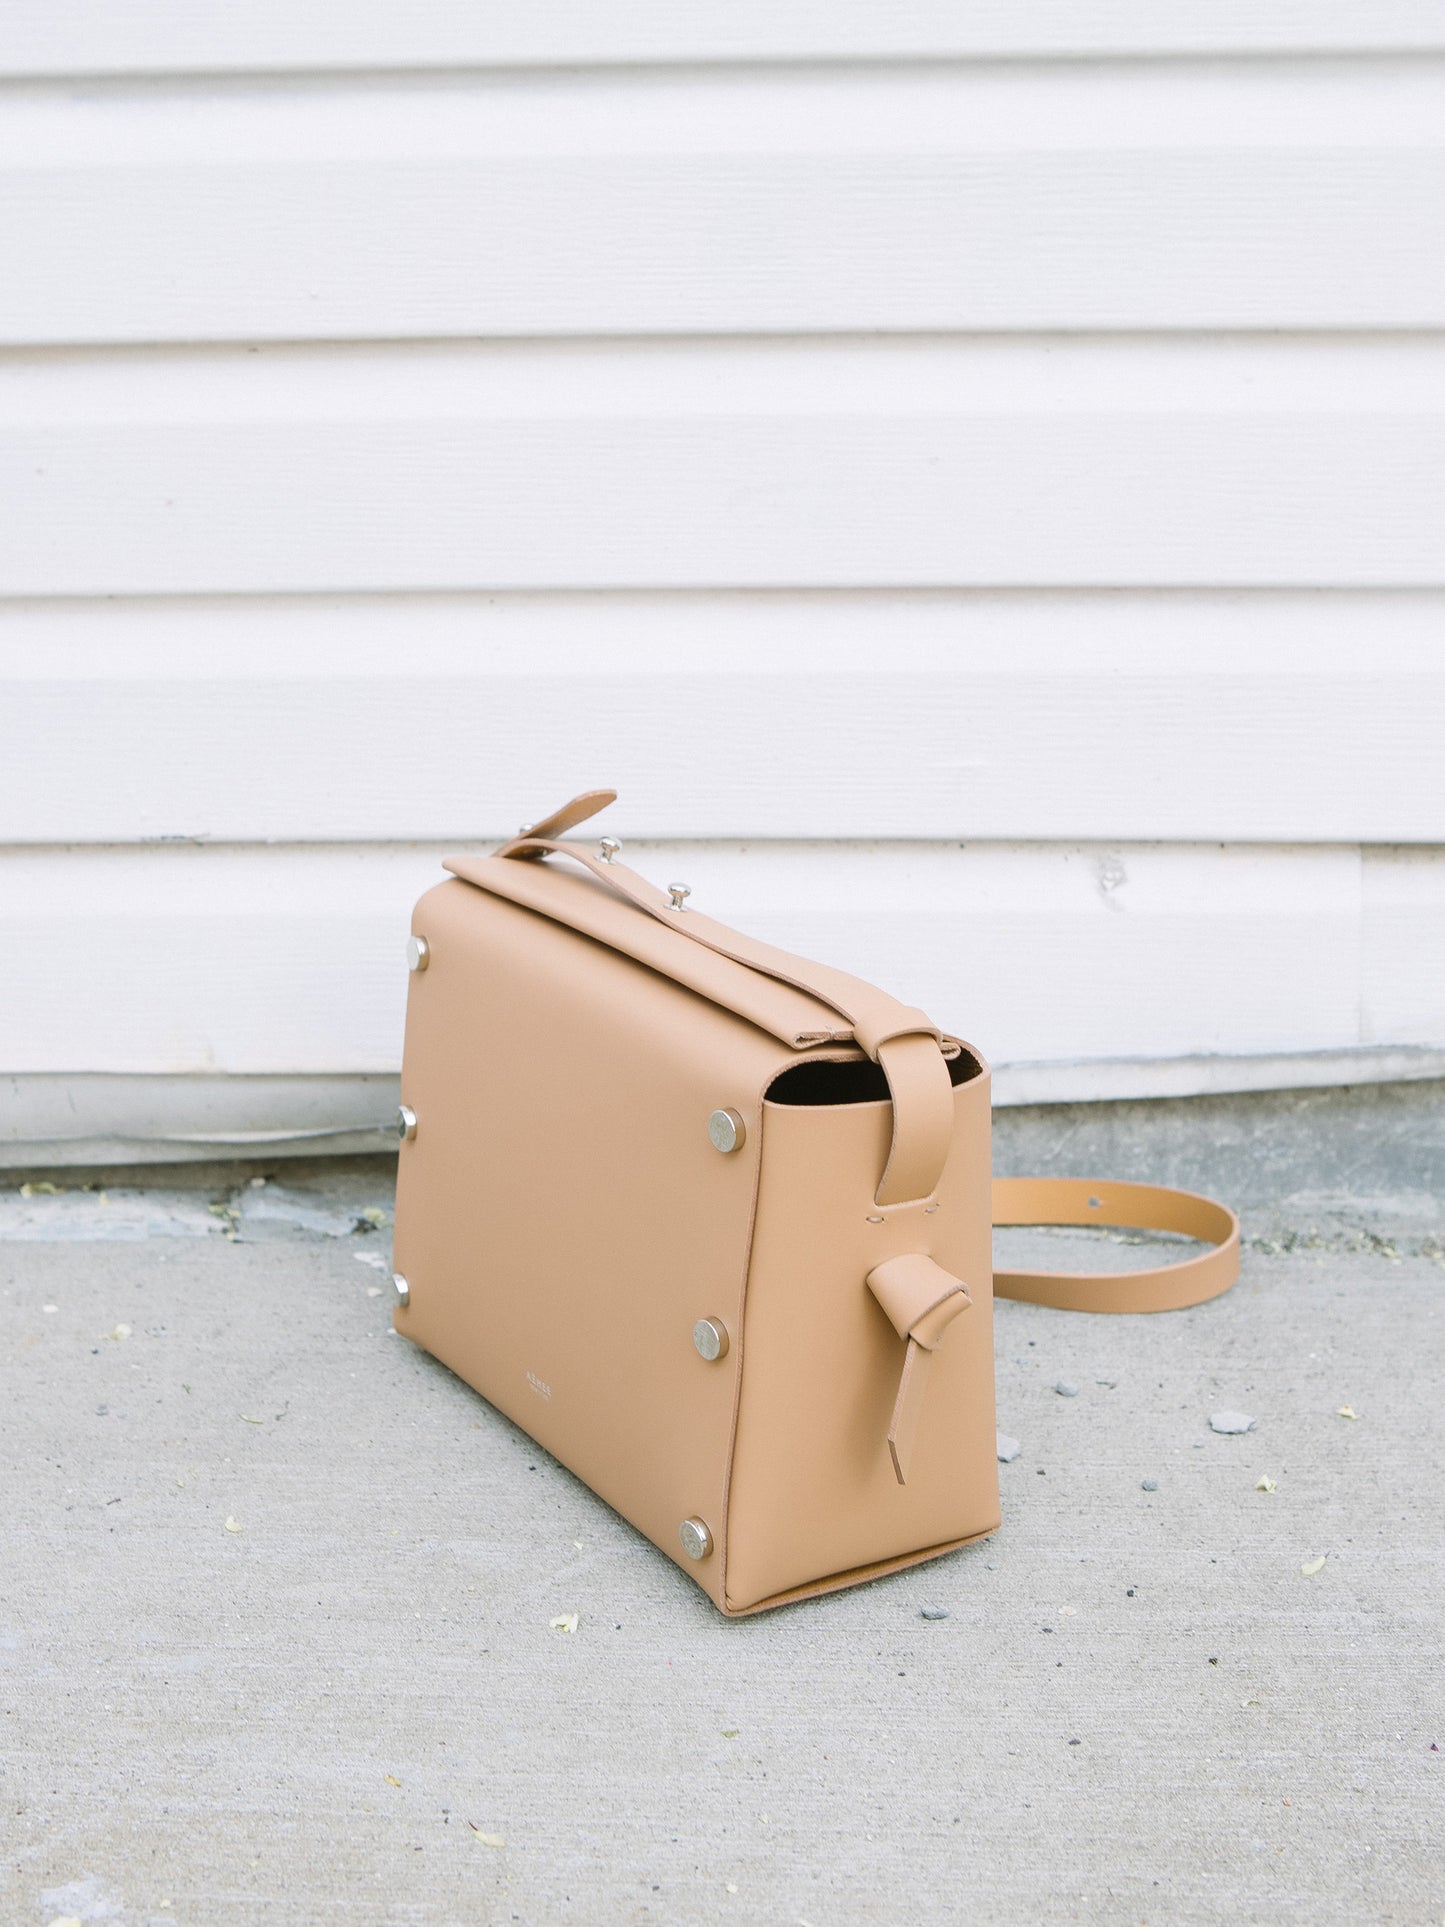 Chic beige crossbody bag and shoulder bag with adjustable strap crafted from Italian vegetable tanned leather for a minimal yet sophisticated look.